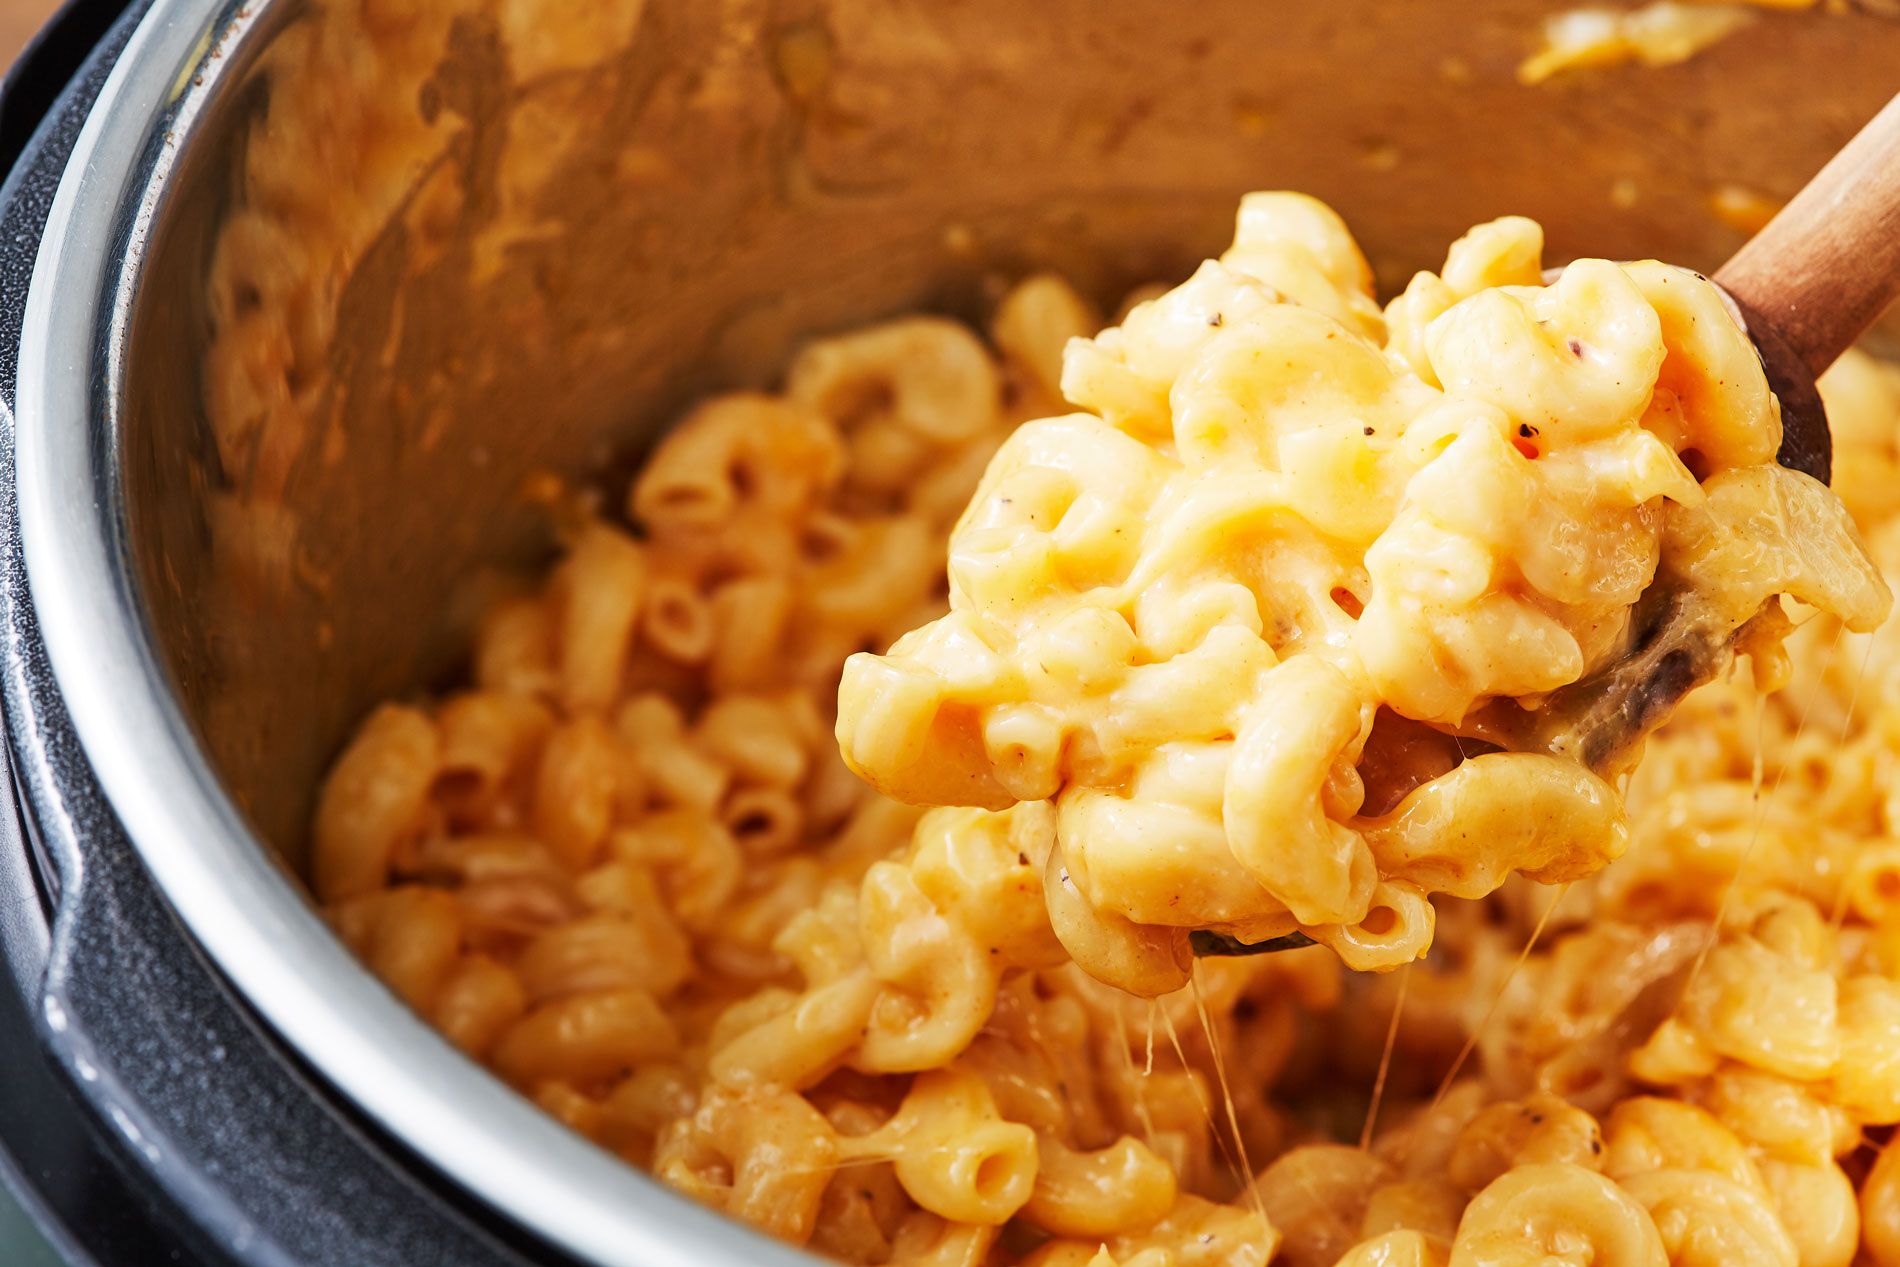 how do i make macaroni and cheese in a pressure cooker